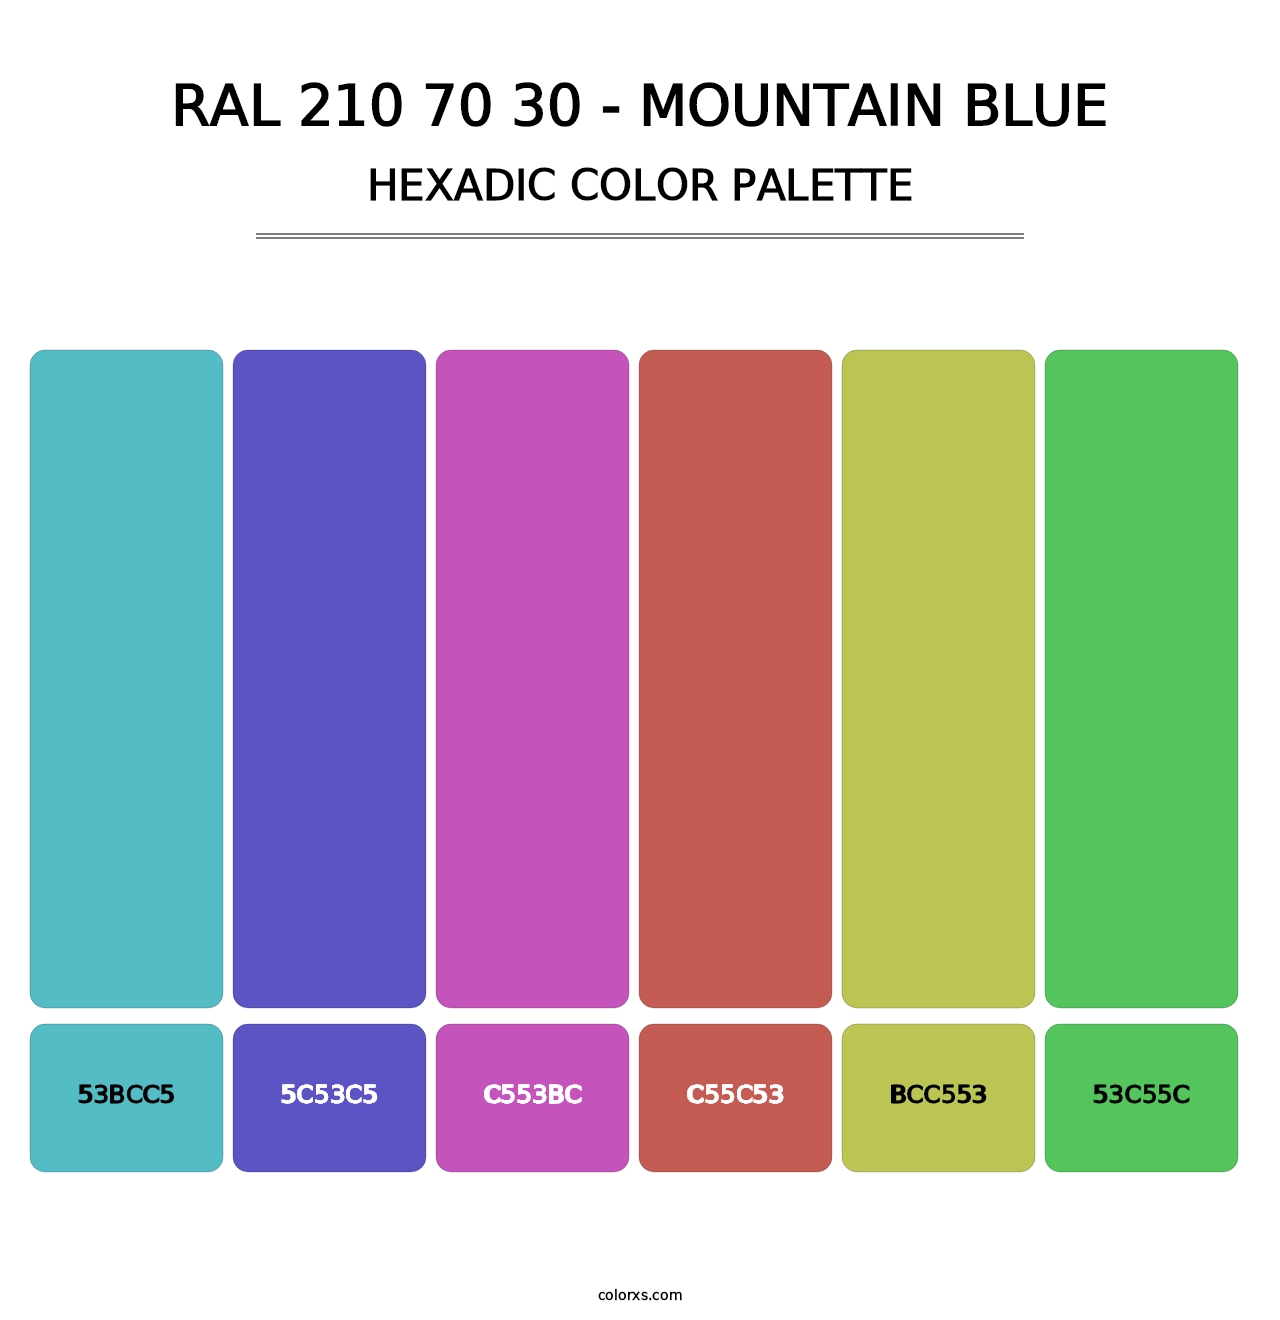 RAL 210 70 30 - Mountain Blue - Hexadic Color Palette